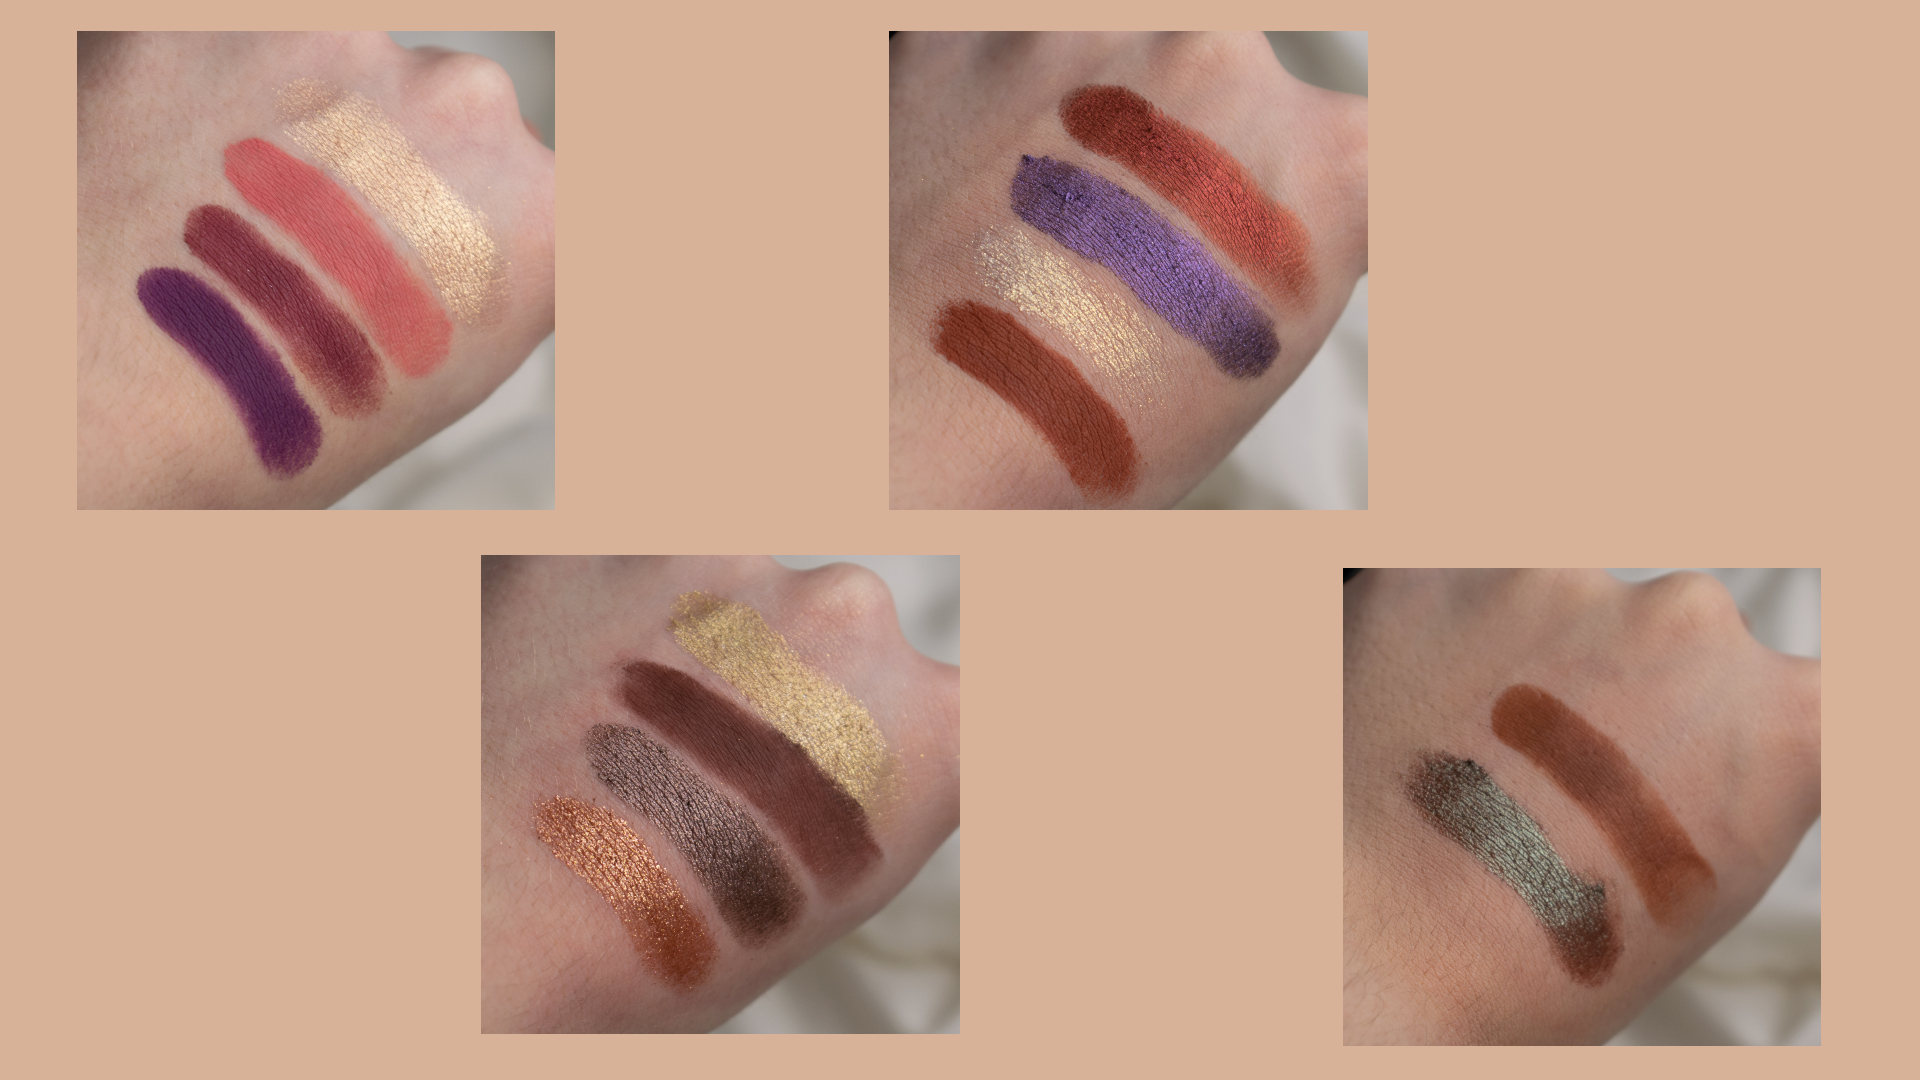 jackie-aina-abh-anastasia-beverly-hills-palette-review-swatches (4)